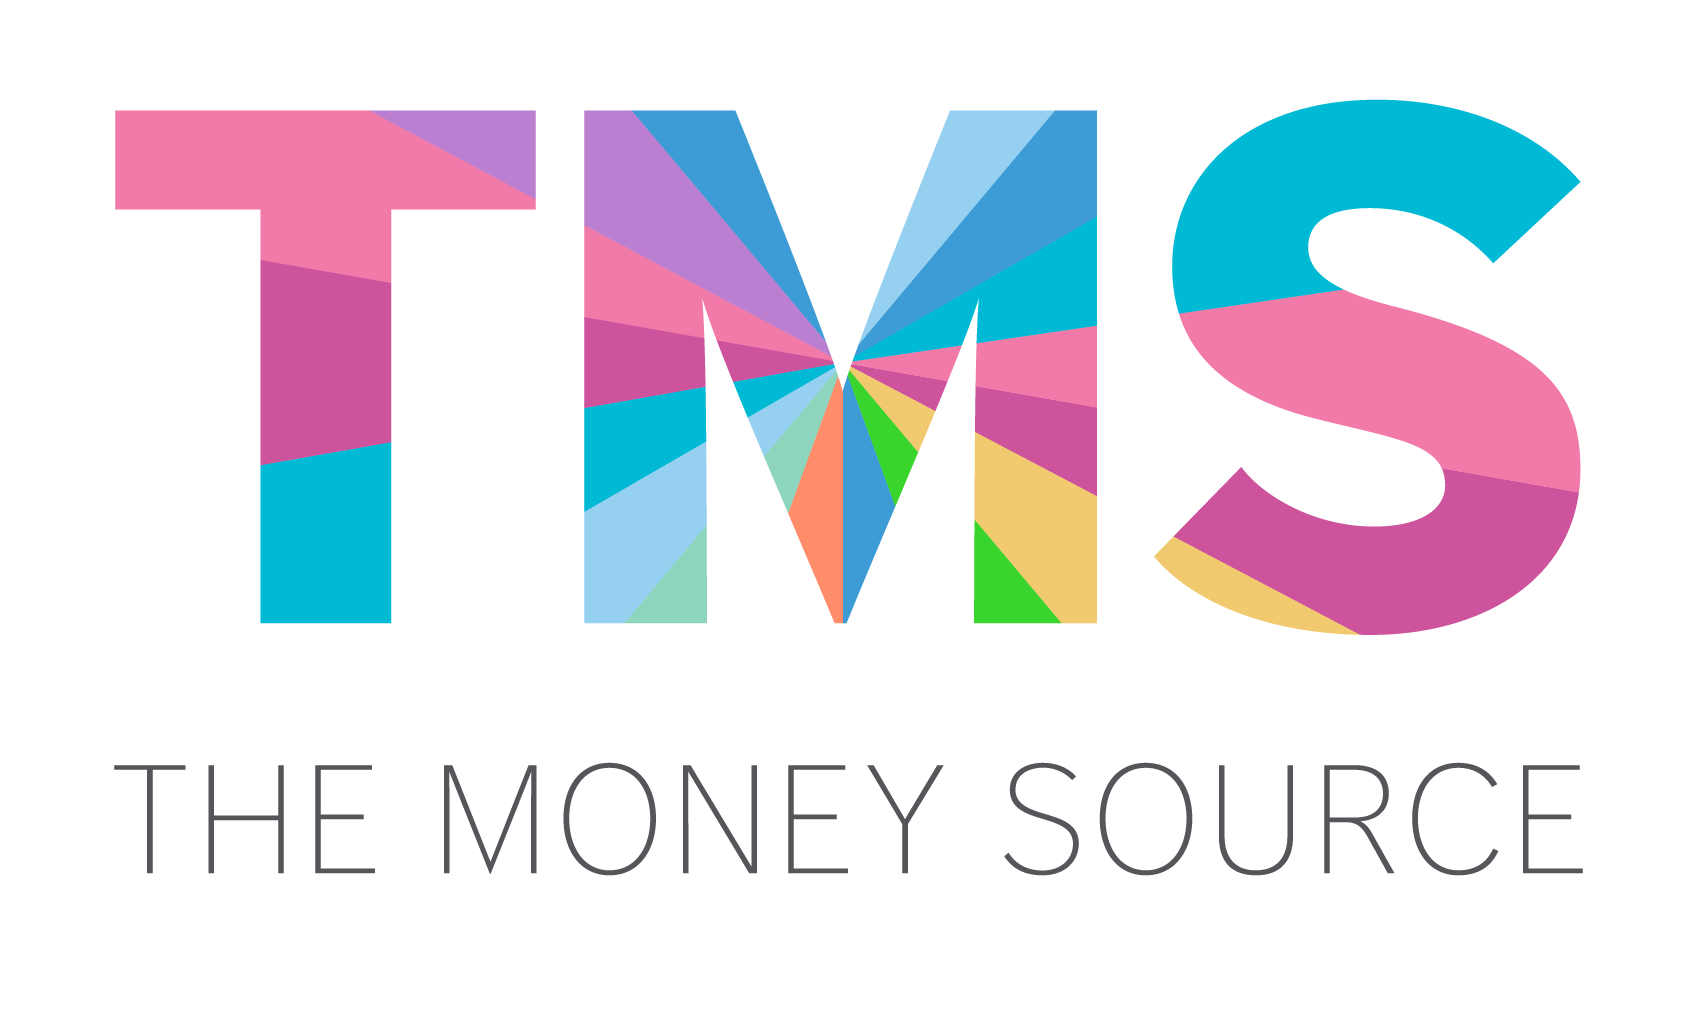 TMS (The Money Source Inc.) has announced the launch of Happinest, providing users with a suite of tools and services to Find, Finance and Protect their dream of homeownership